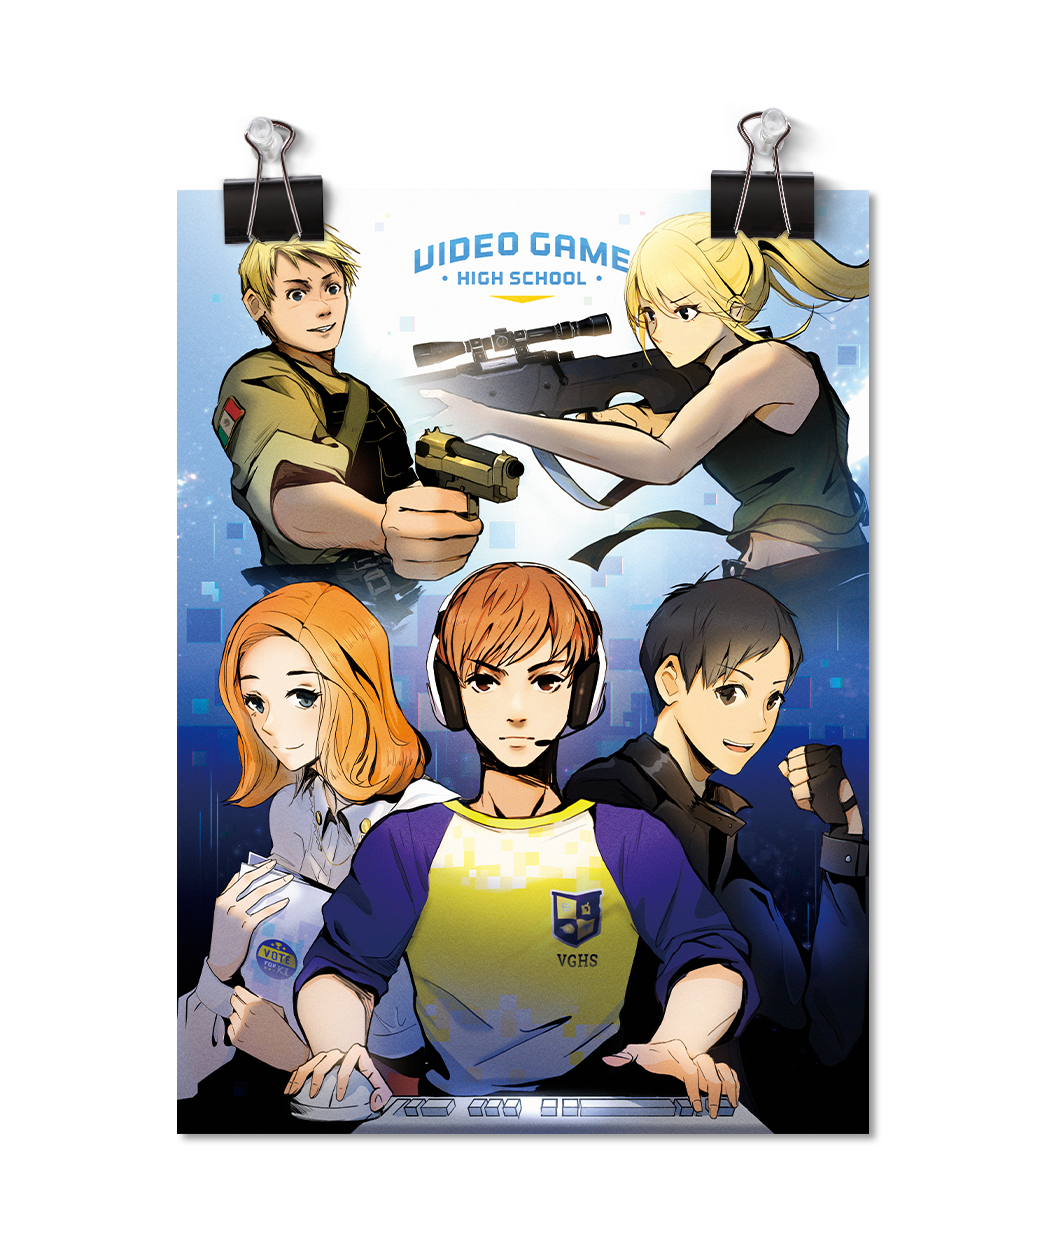 A postcard sized print in the anime style of the five main characters in Video Game High School.